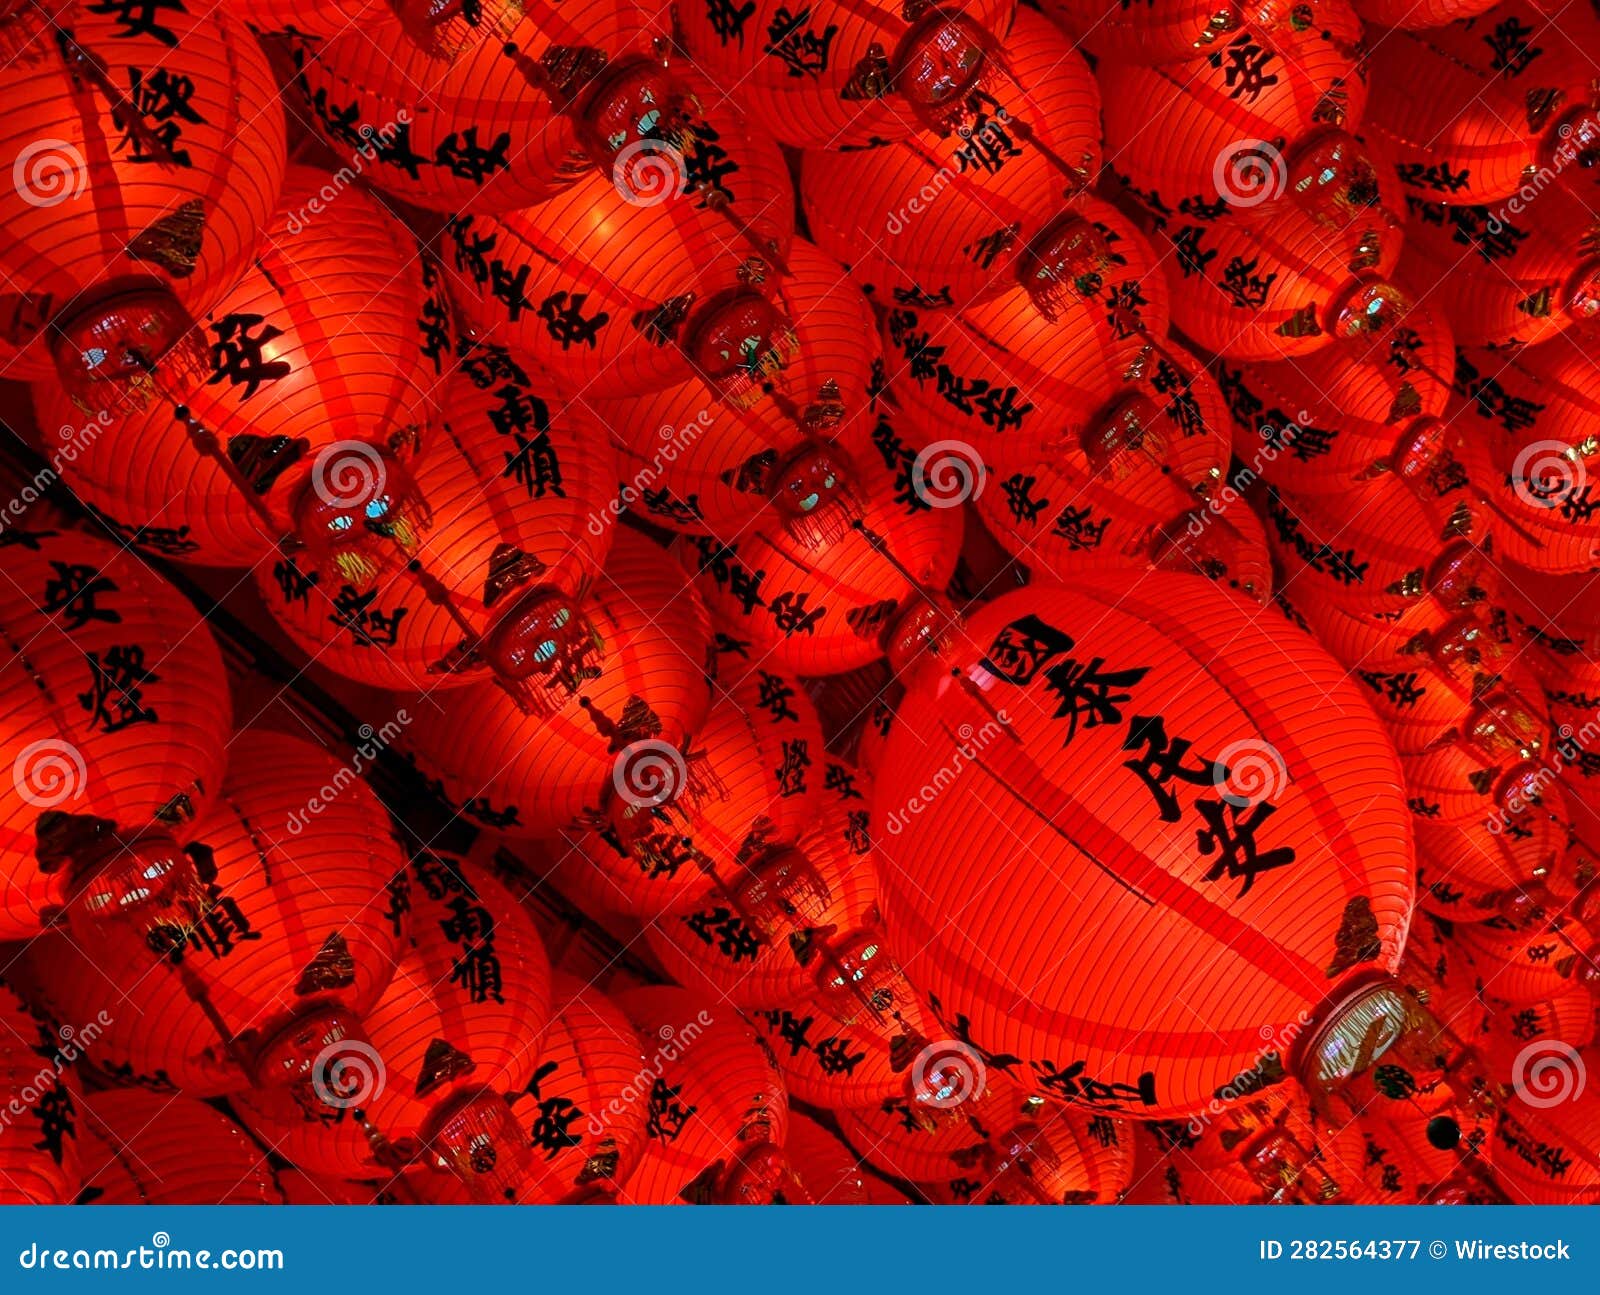 an array of vibrant red taiwanese lanterns hanging from ceiling, labeled with chinese hieroglyphs